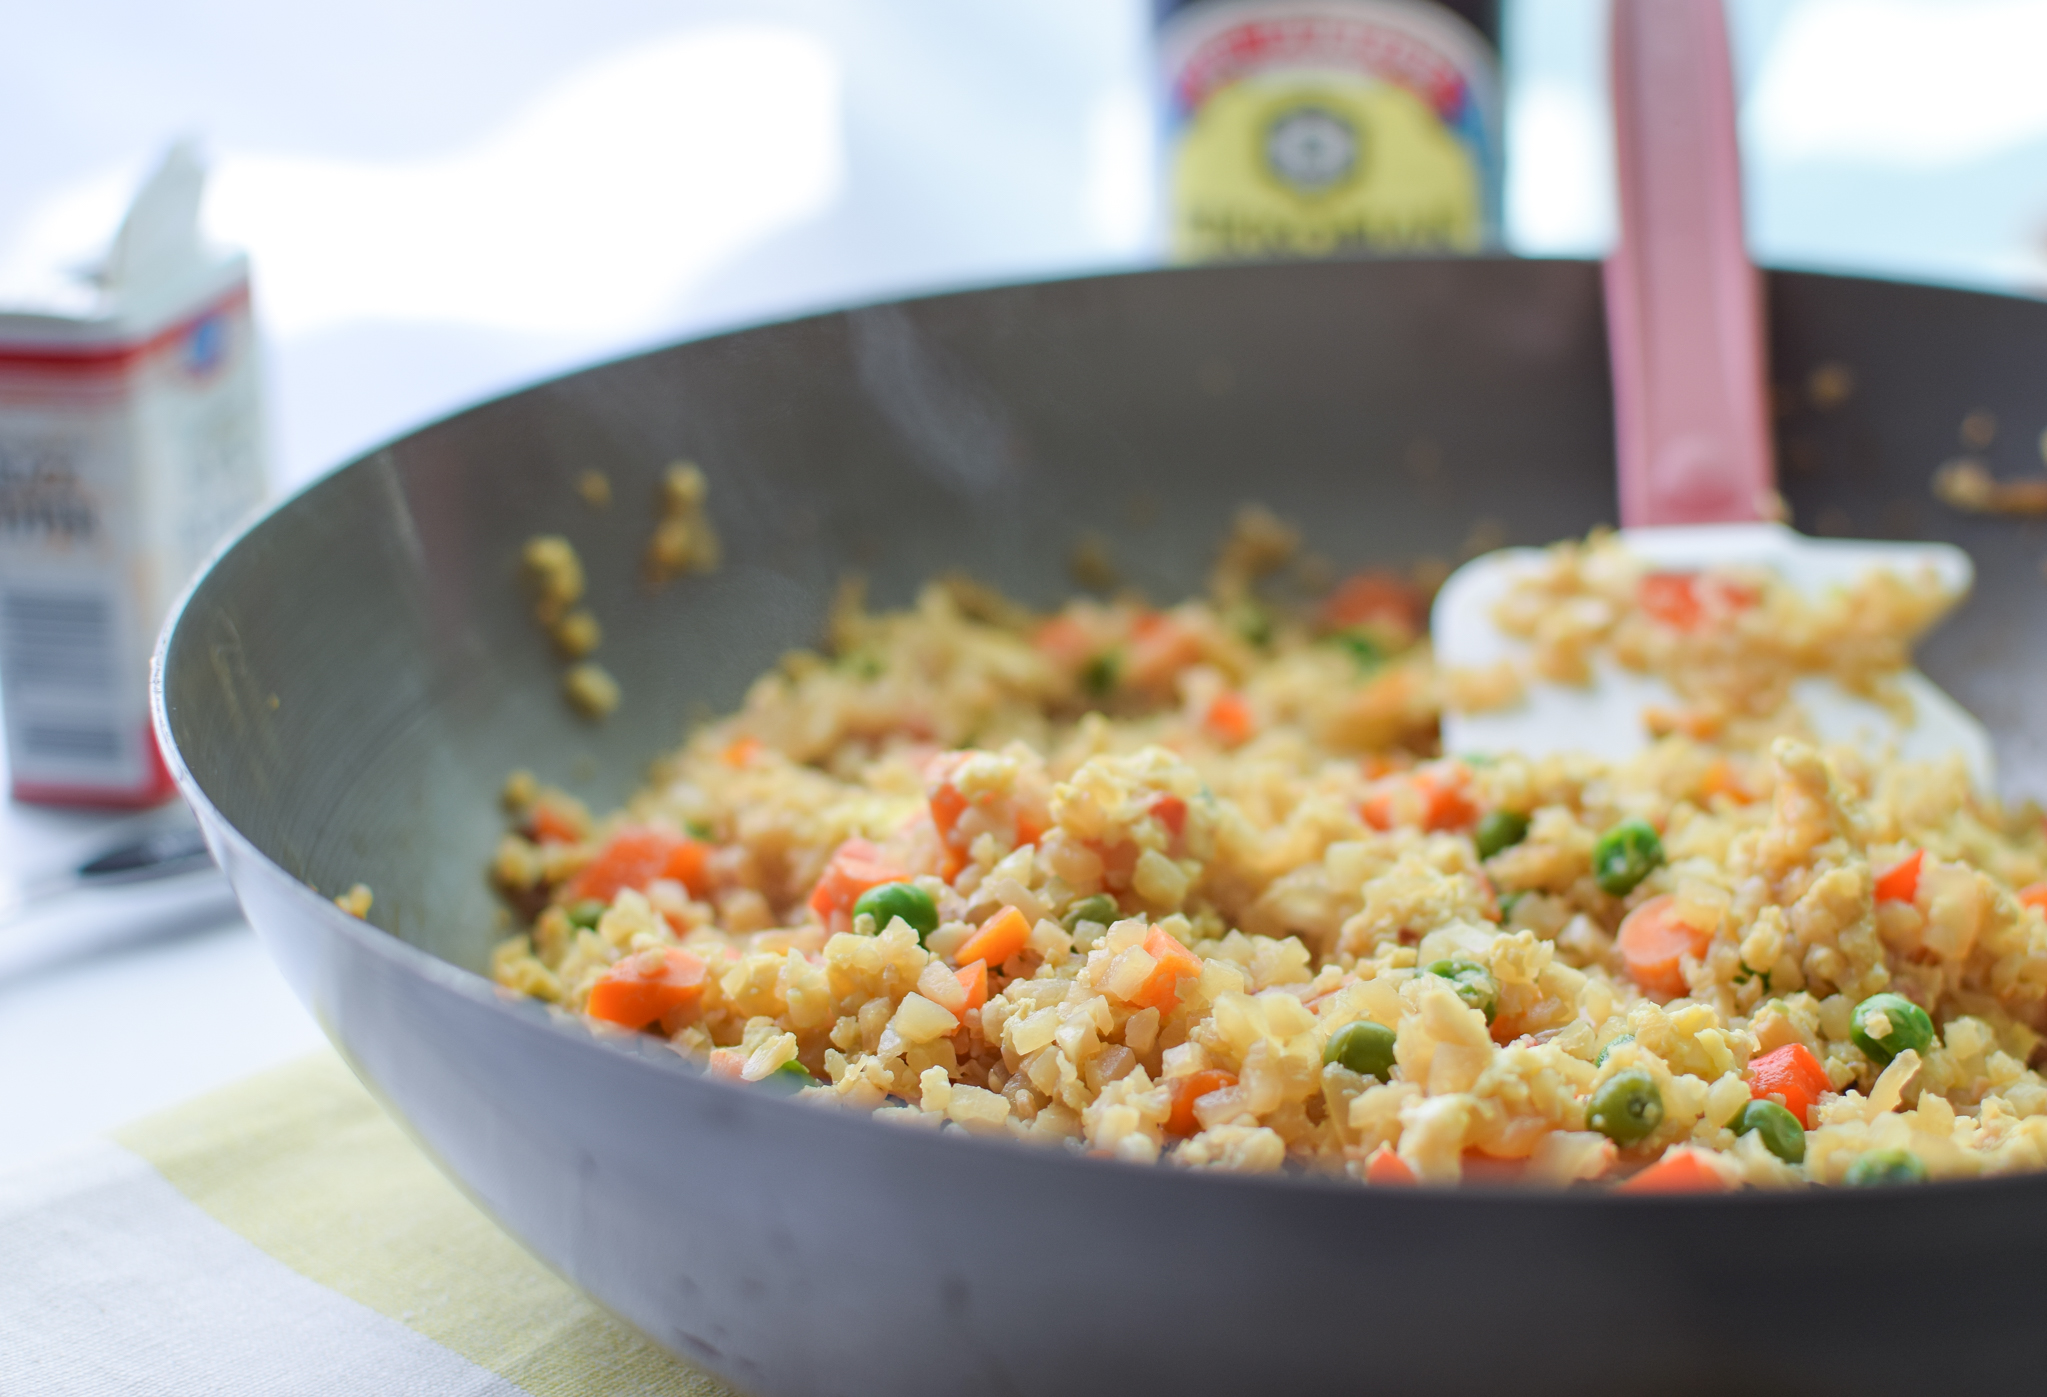 Fried Cauliflower Rice Recipe - Super healthy takeout style fried "rice", made with cauliflower! Packed with veggies and easy to personalize. - ProjectMealPlan.com